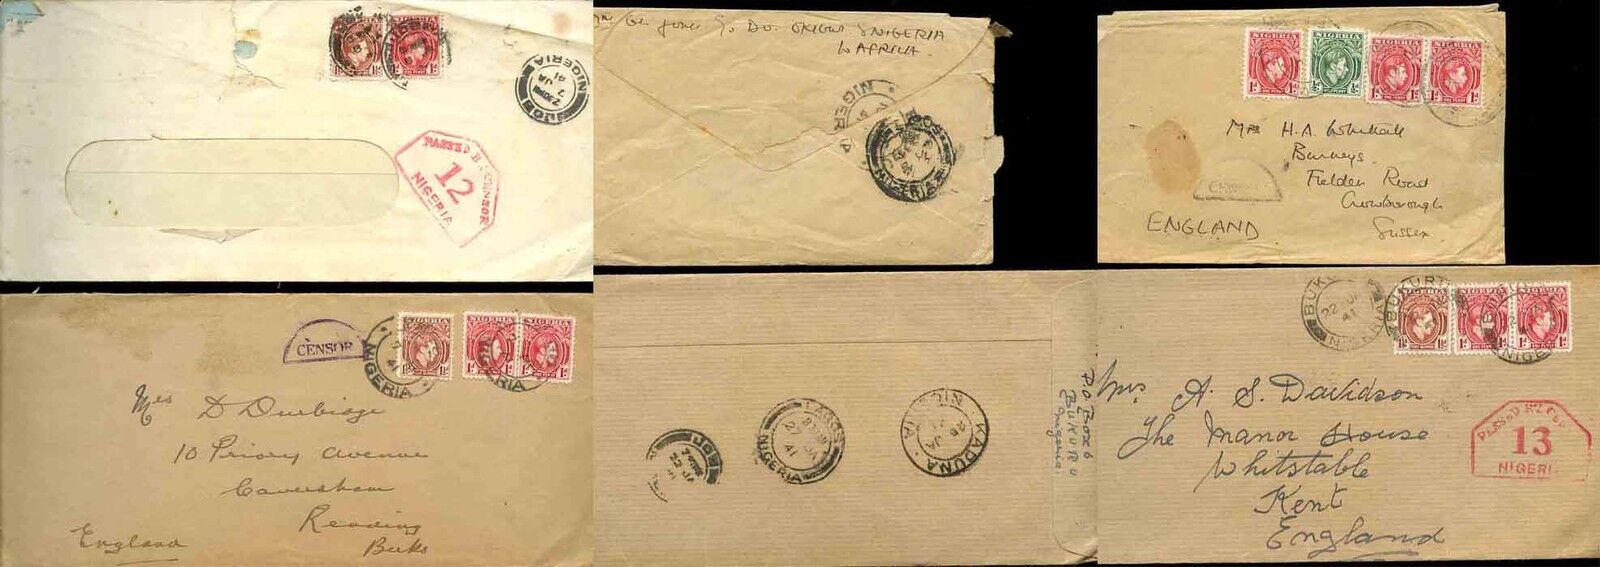 NIGERIA 1941 CENSORED COVERS to GB...3 1/2d RATE...4 ITEMS